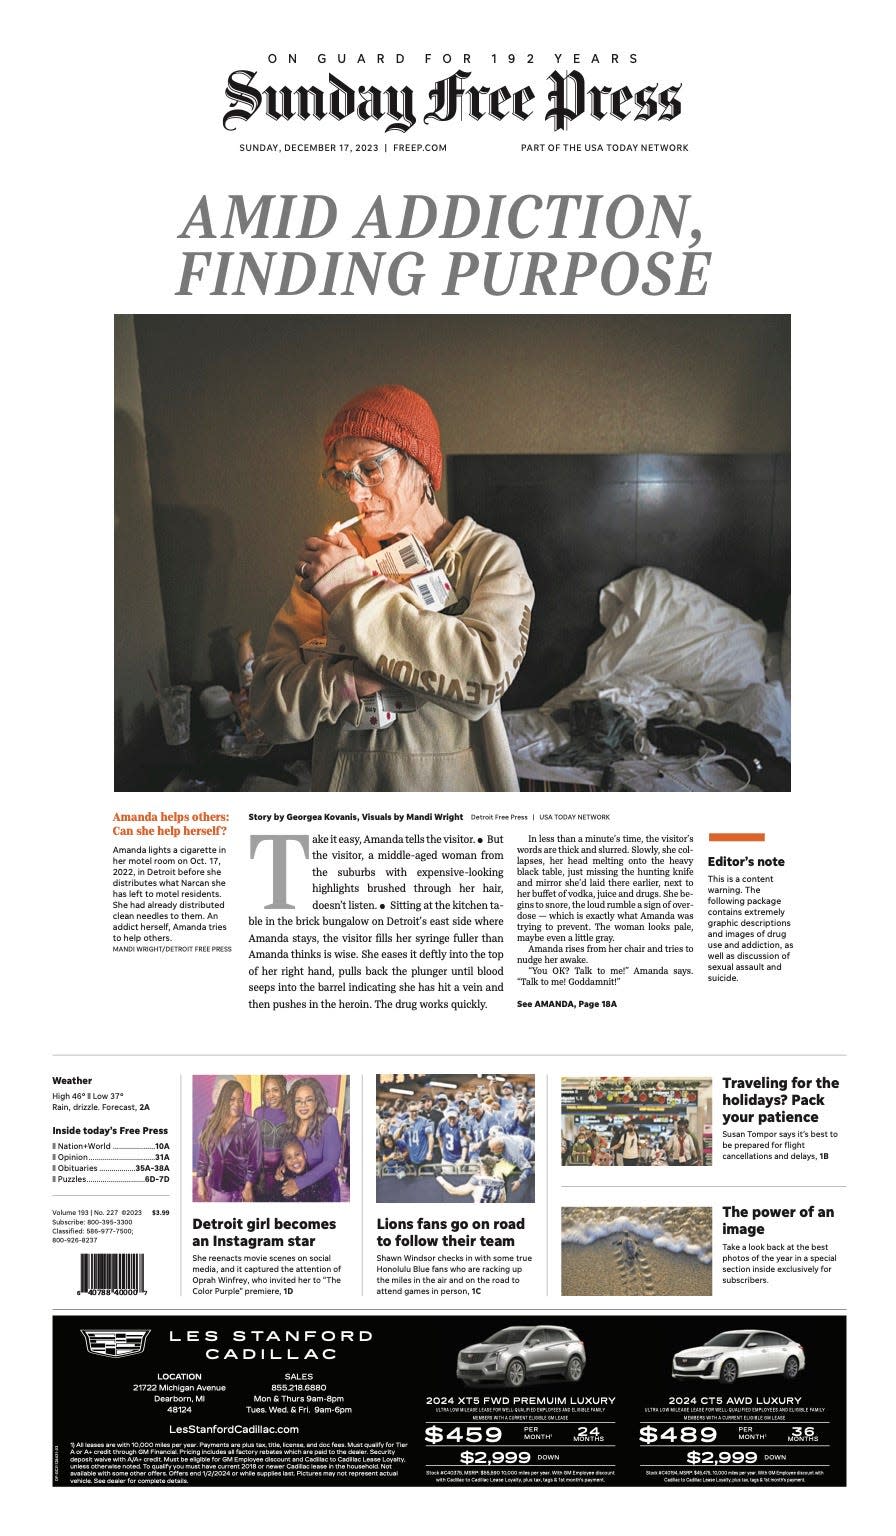 The Free Press published the article about and photography of Amanda, her life and her efforts to get life-saving harm-reduction supplies to drug users like her. This is an image of the front page of the Sunday Free Press on Dec. 17. The project as printed in the Detroit Free Press is at the end of the article.